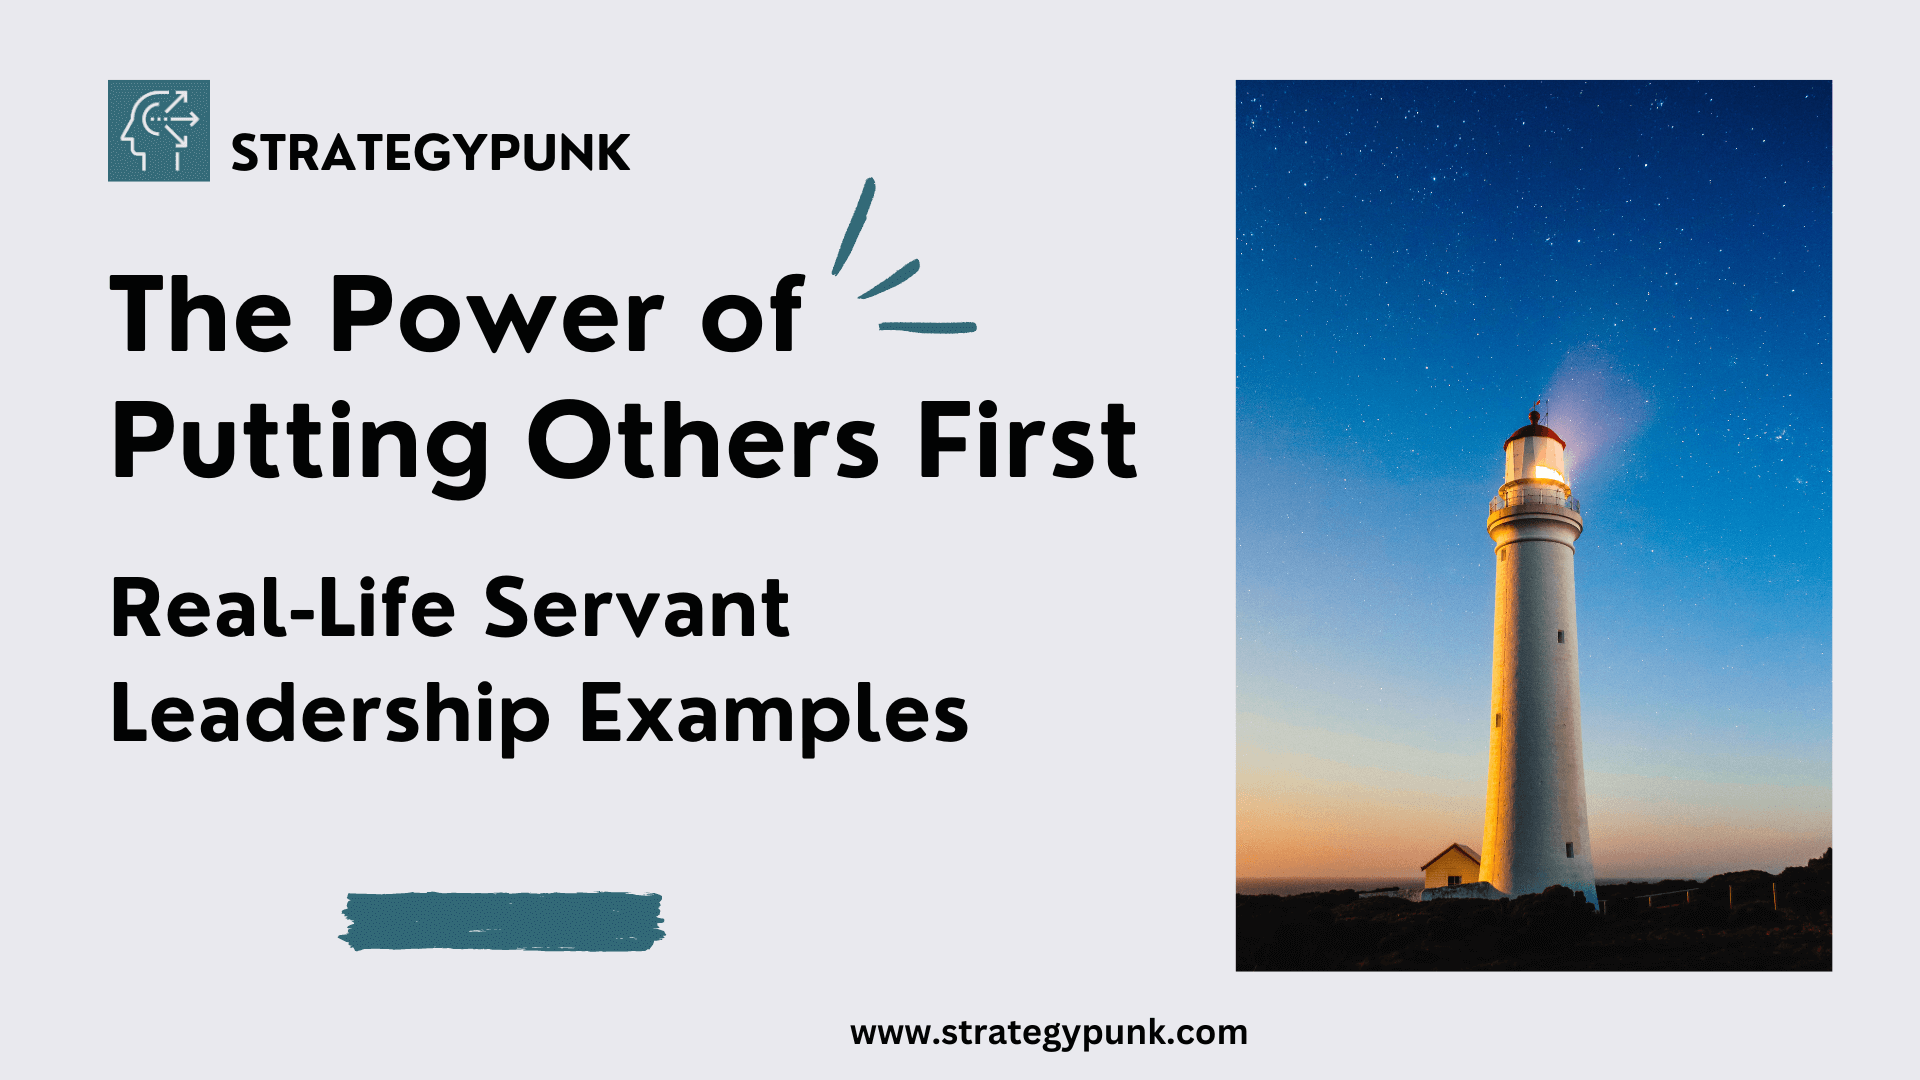 The Power of Putting Others First: Real-Life Servant Leadership Examples